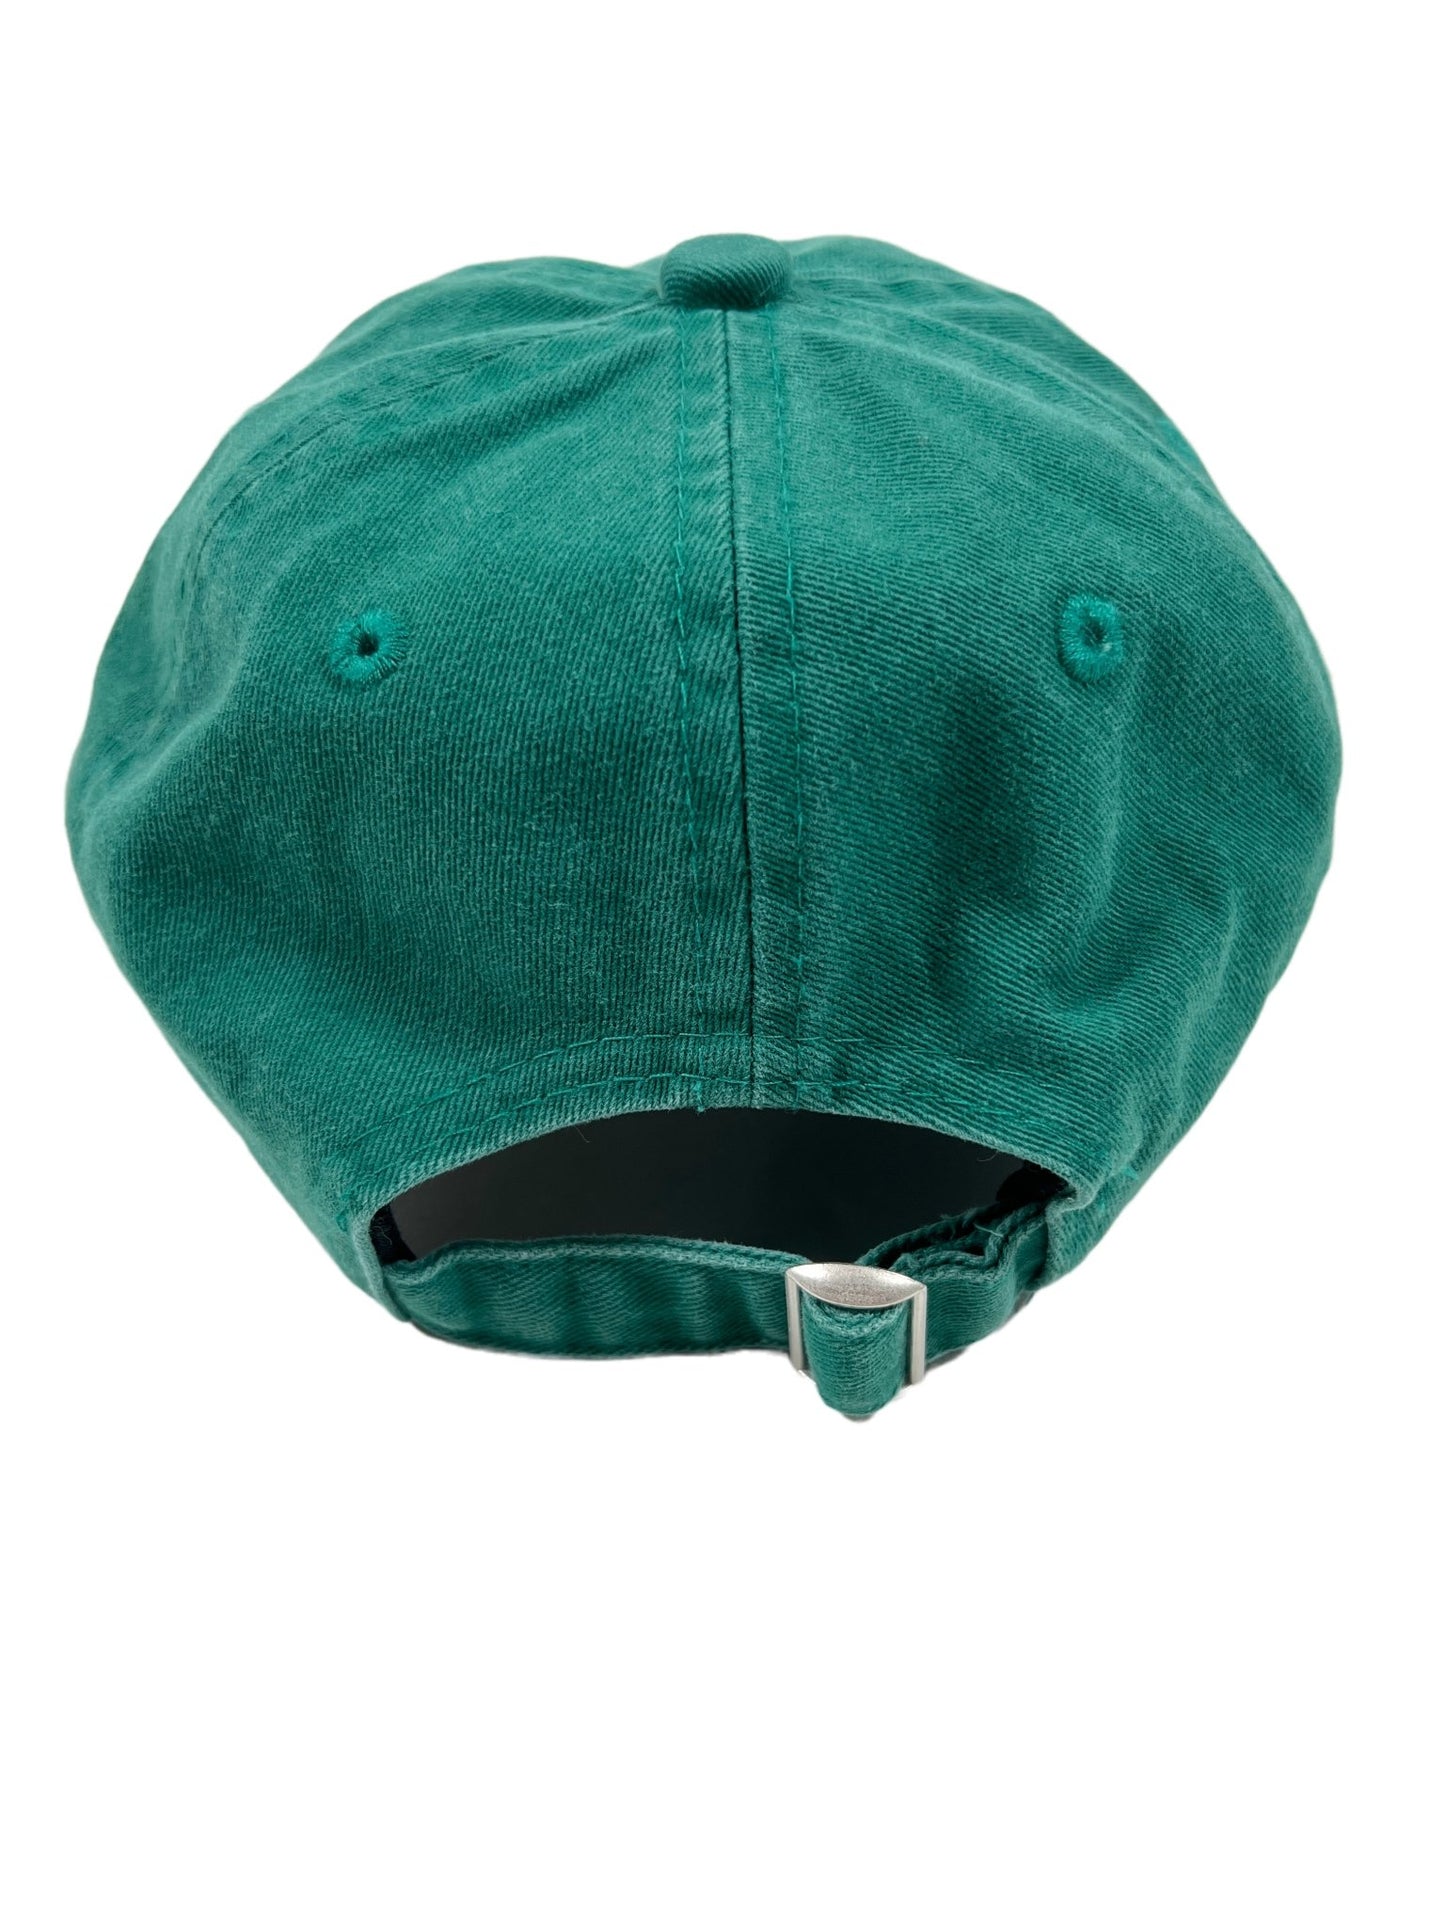 A green DROLE DE MONSIEUR baseball cap with an adjustable strap and embroidered branding.